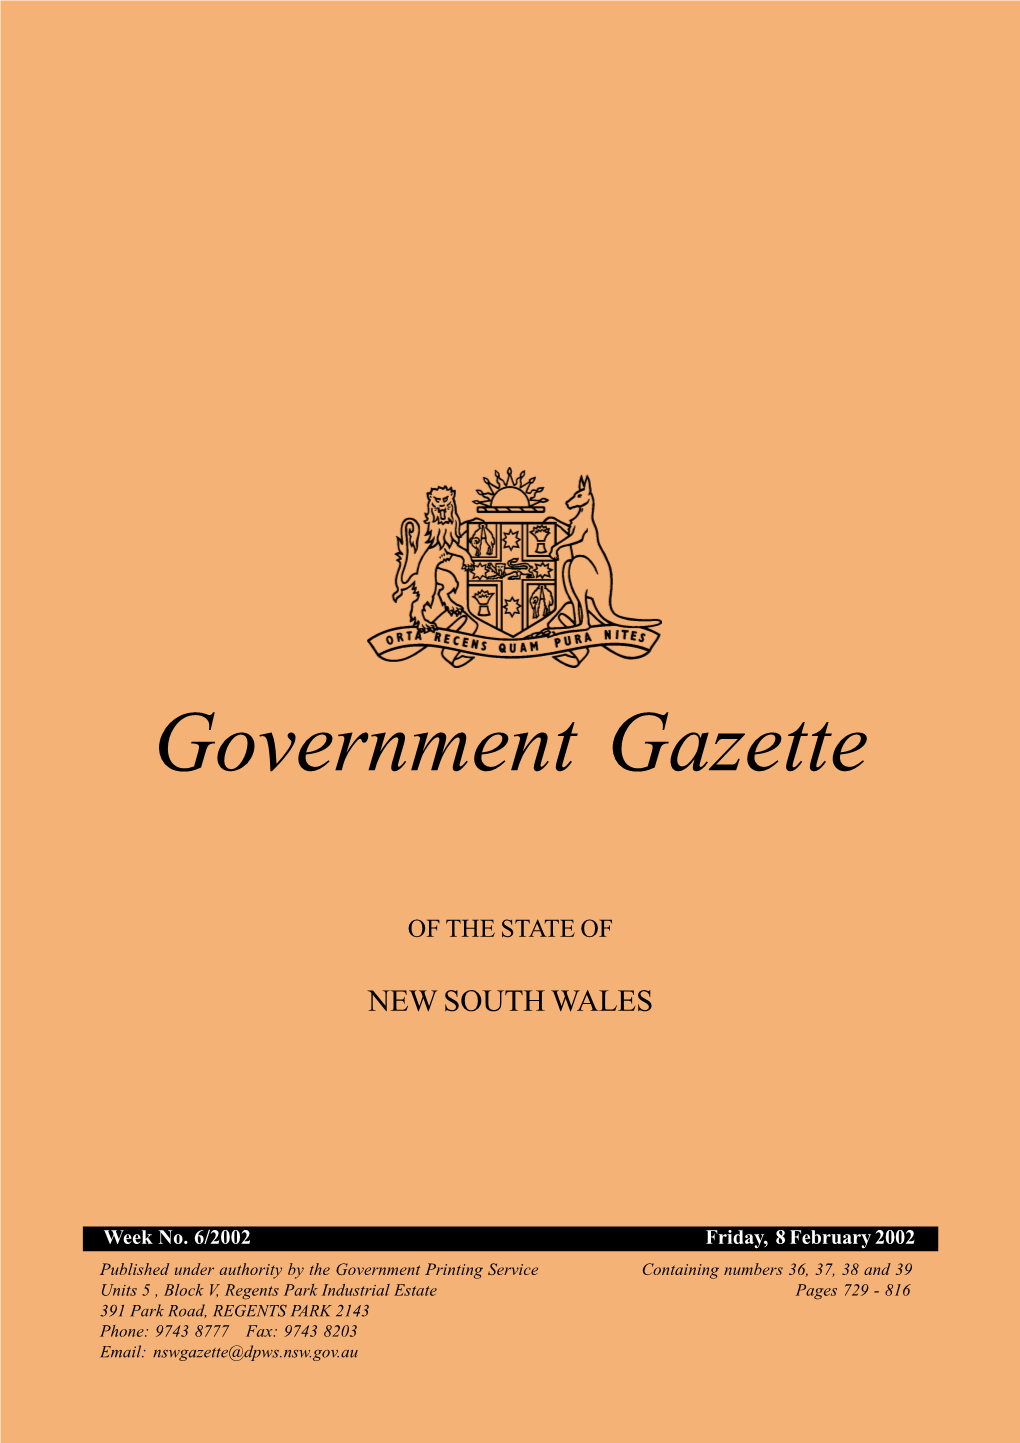 New South Wales Government Gazette No. 6 of 8 February 2002